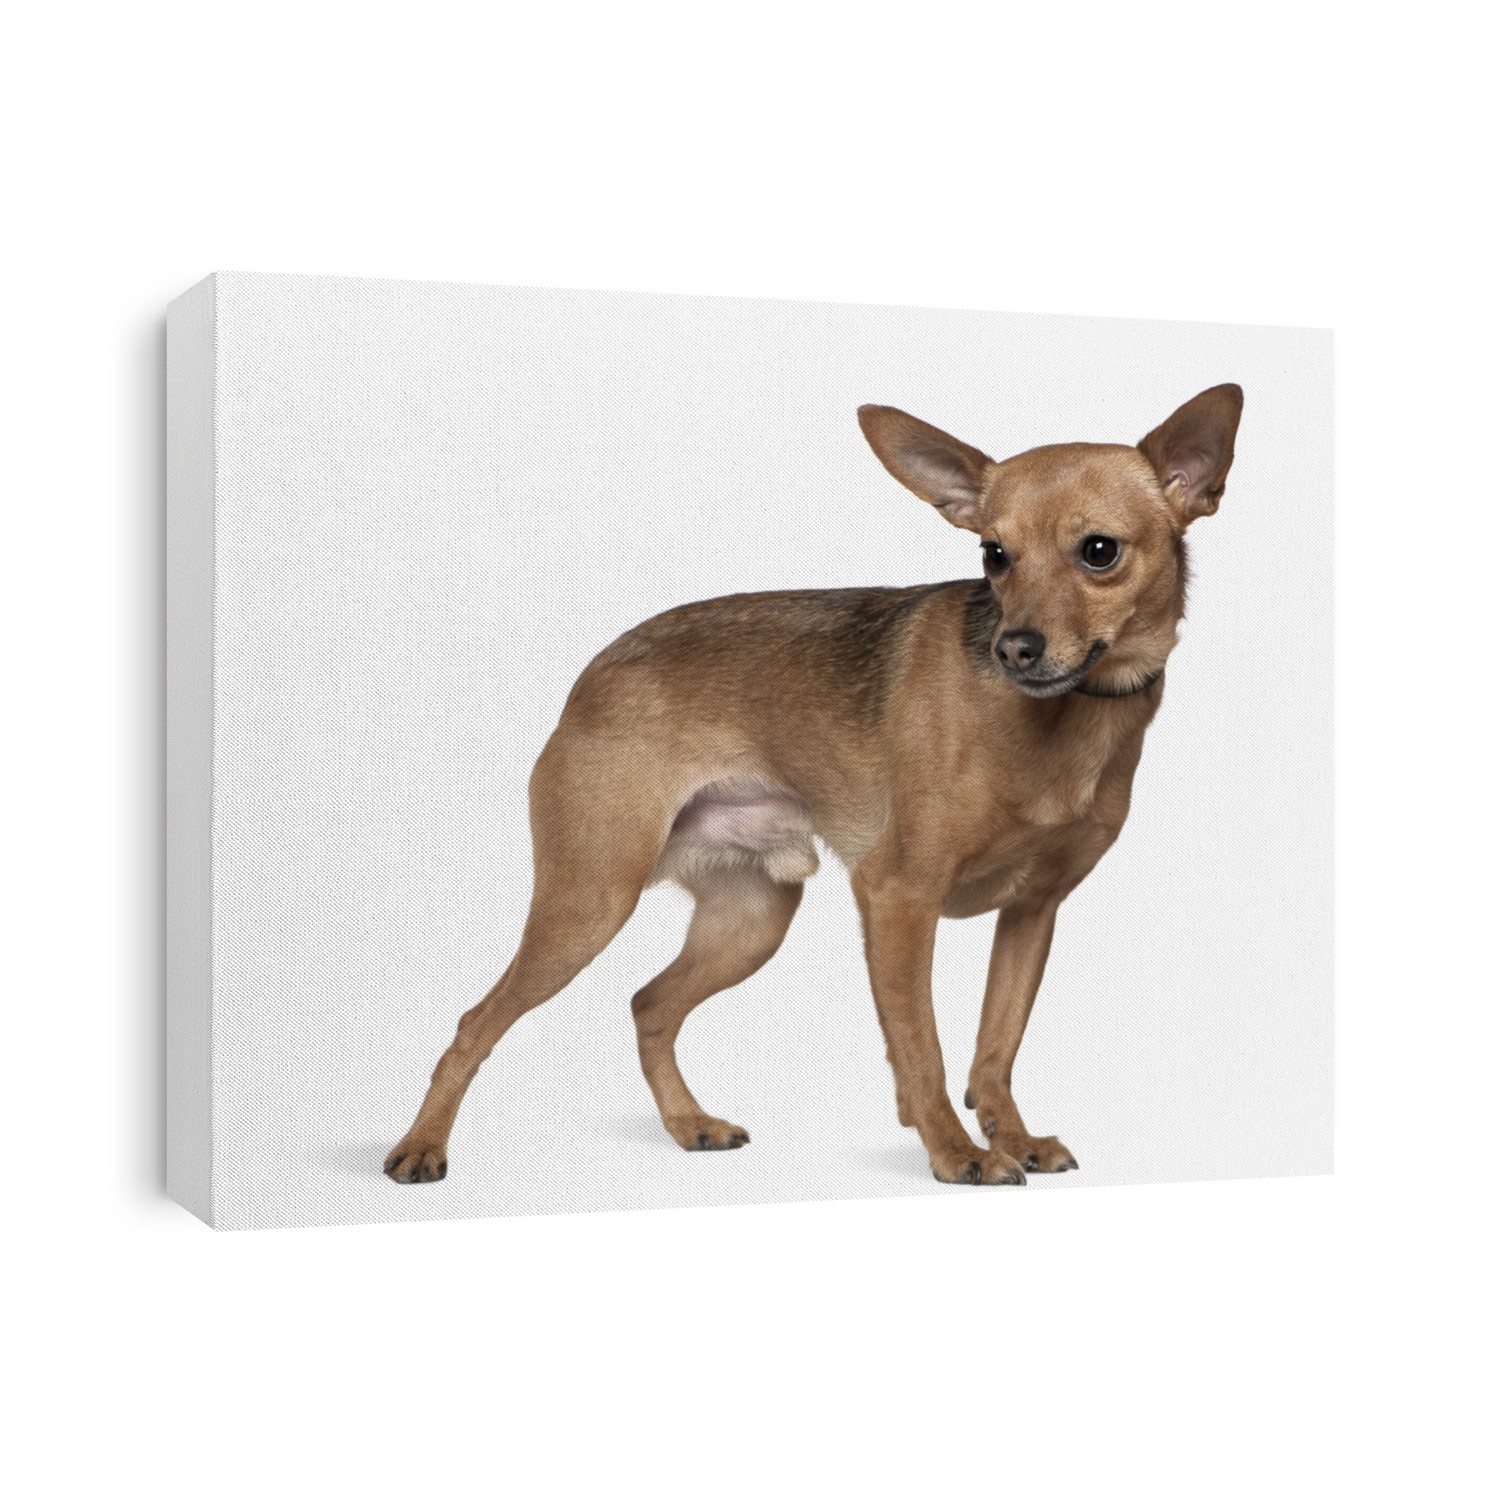 Miniature pinscher, 6 years old, standing in front of white background